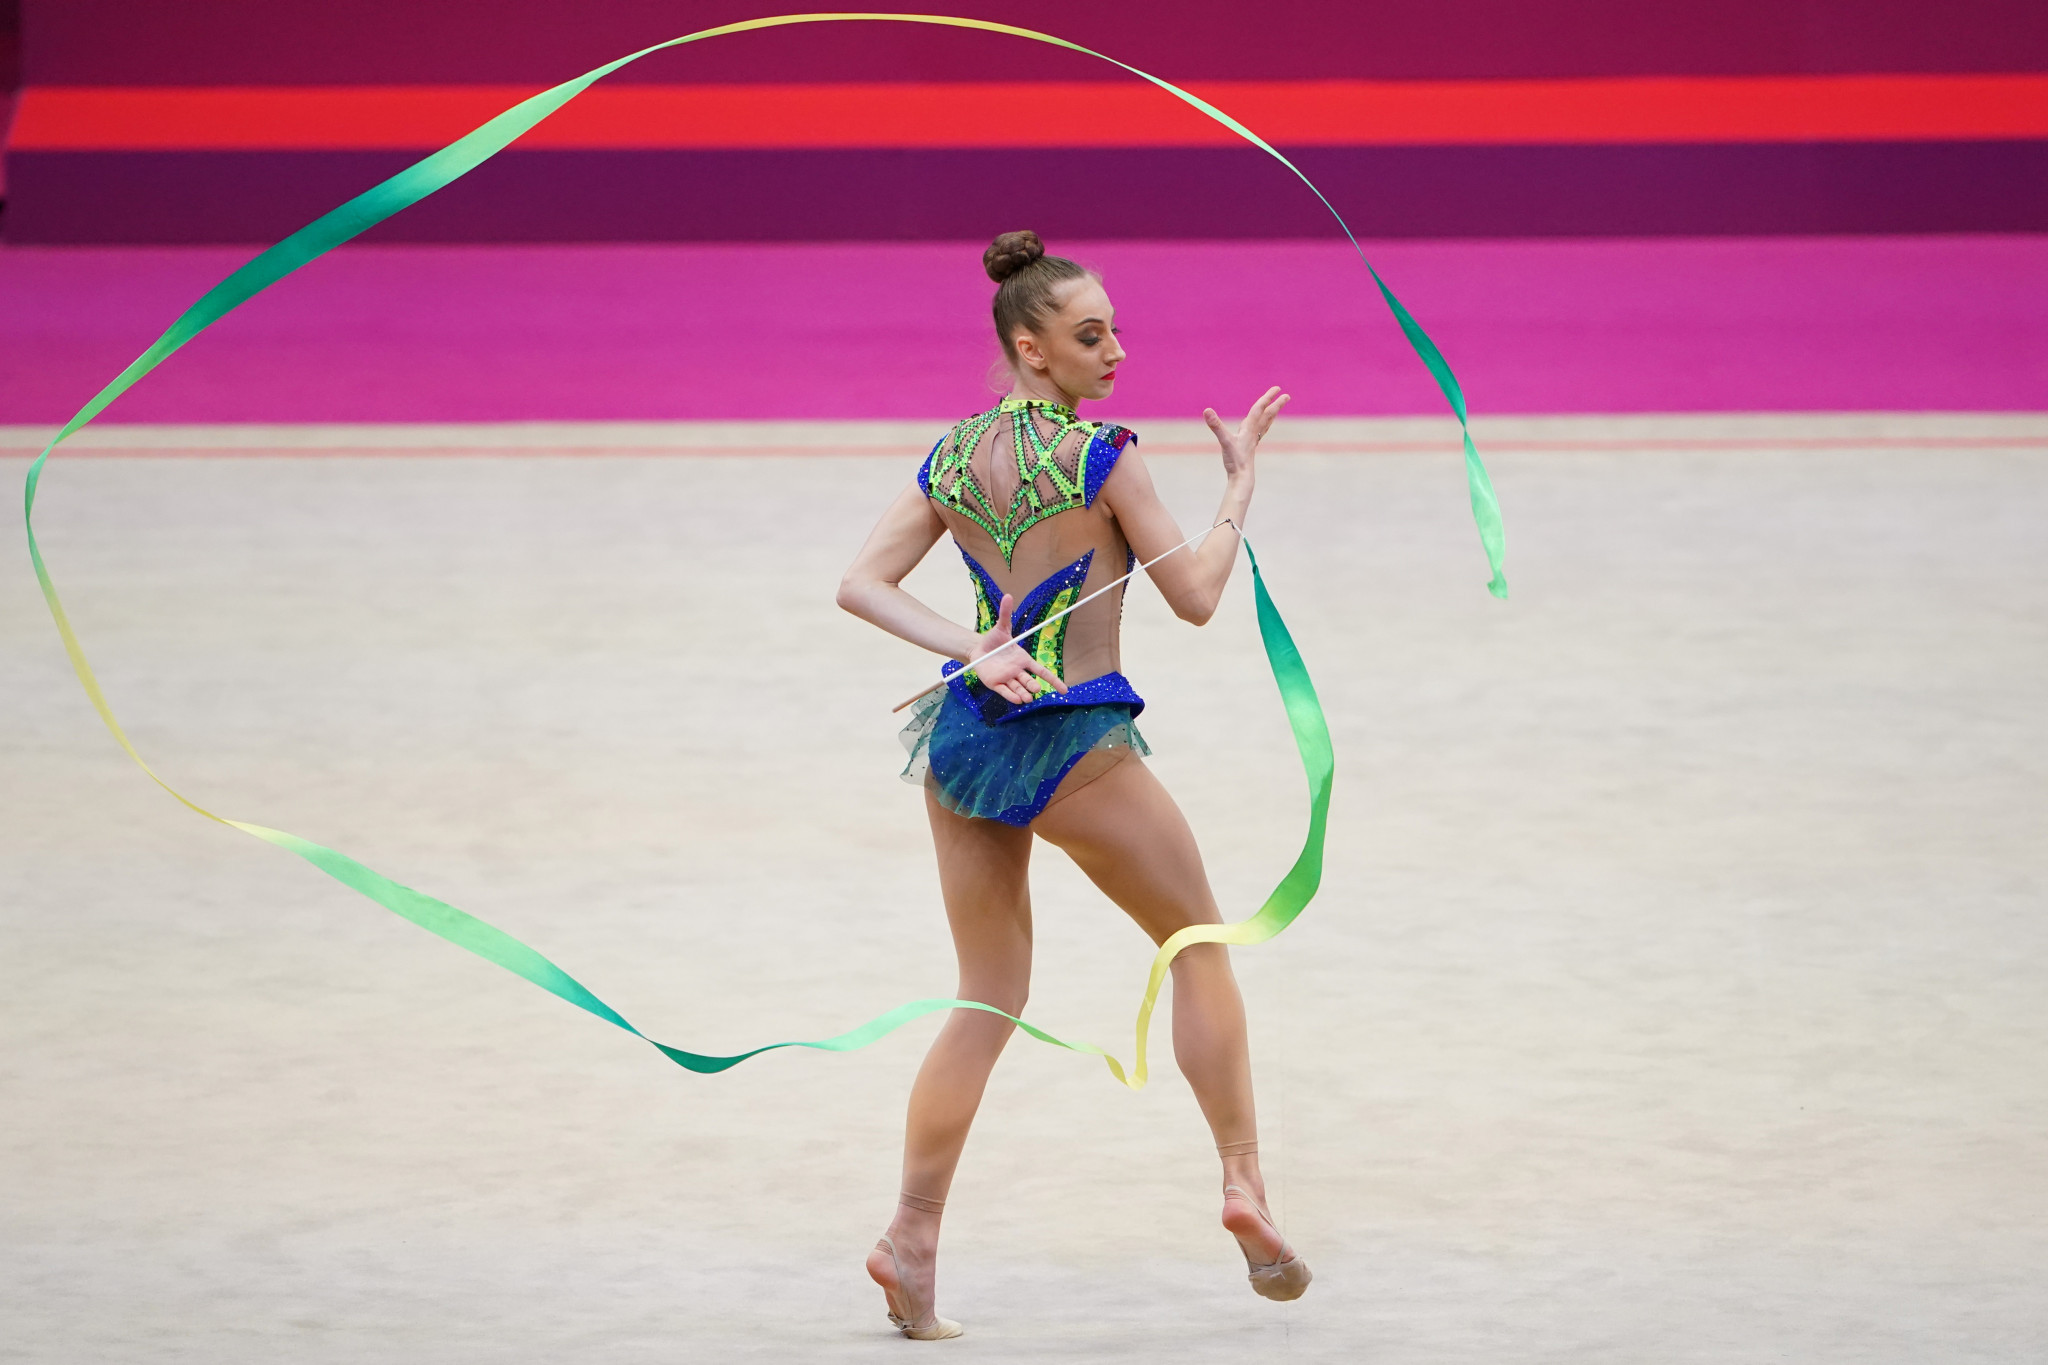 Bulgaria's Boryana Kaleyn took the lead on home soil with a total score of 64.100 at the Rhythmic Gymnastics World Cup in Sofia ©Getty Images